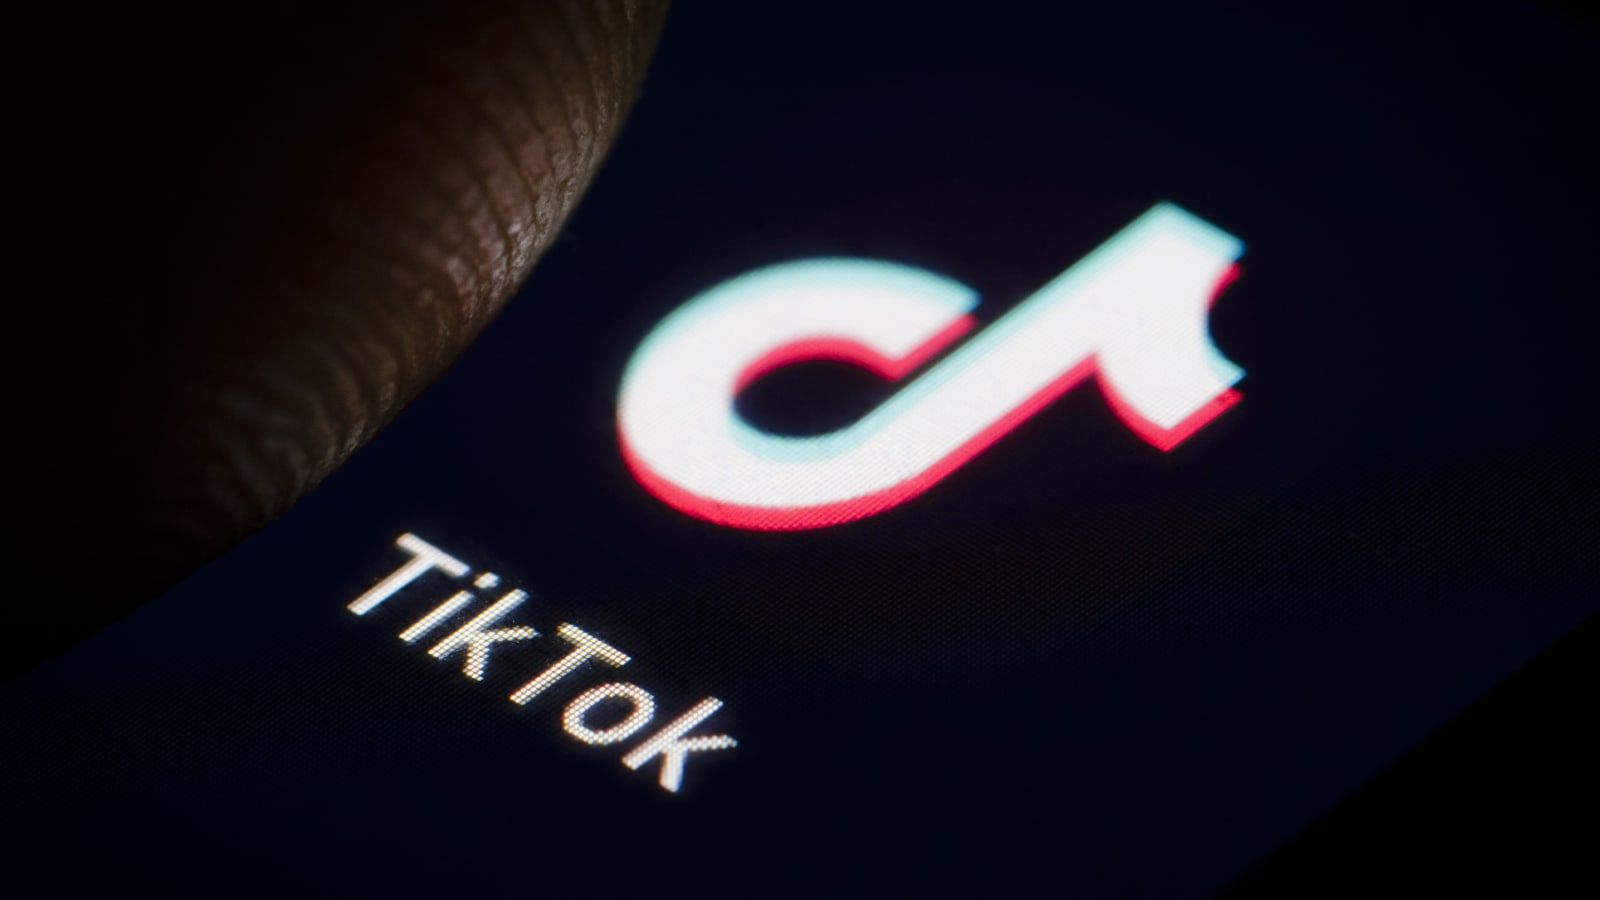 TikTok Hong Kong: App disappears from app stores after announcing exit